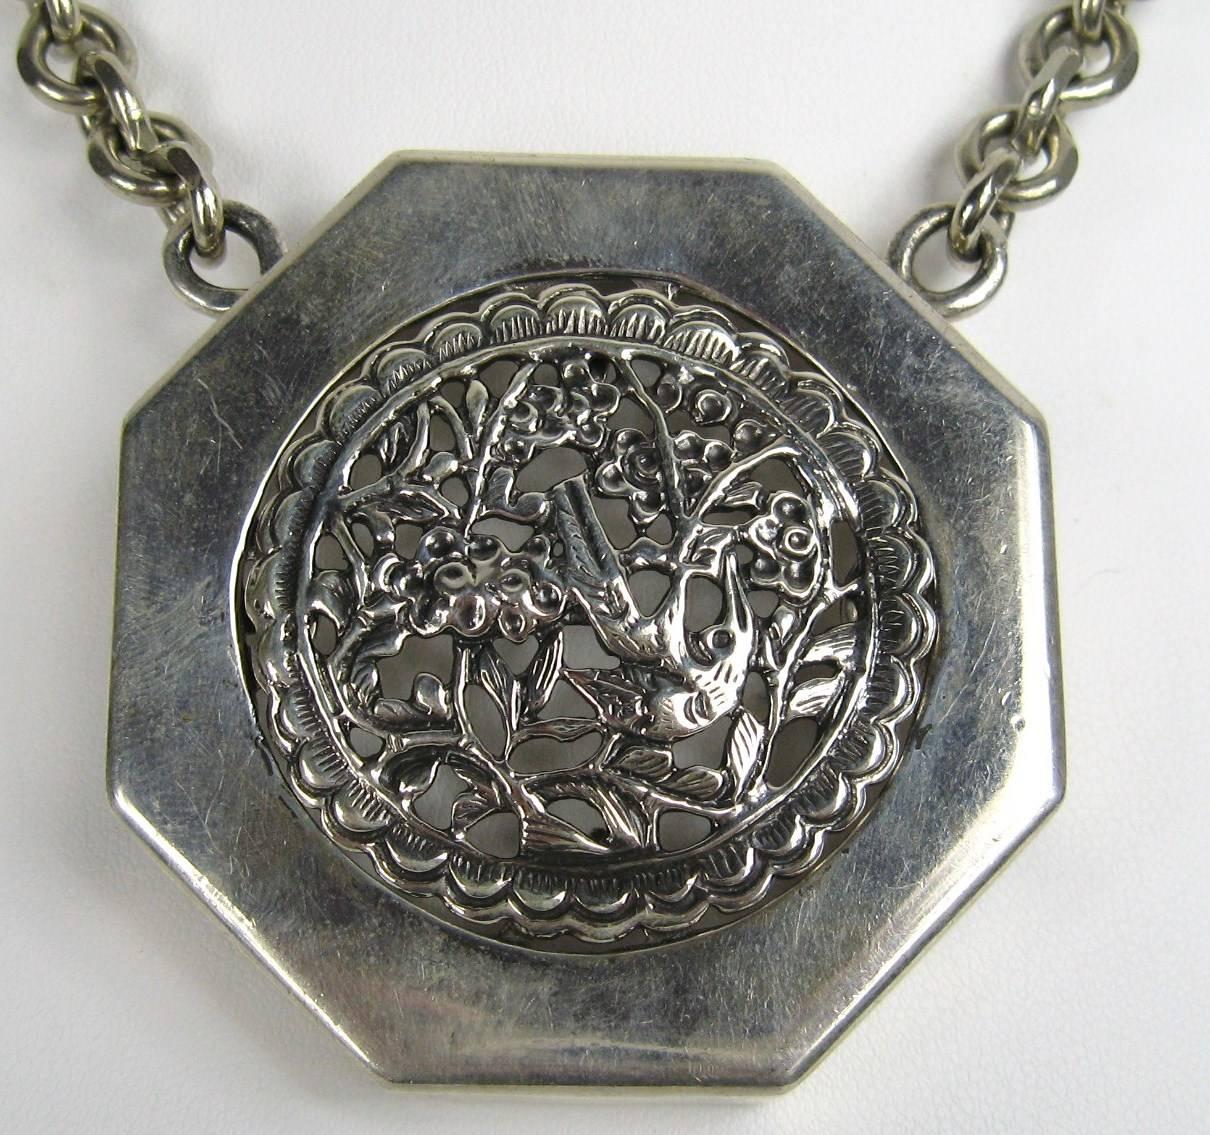 This is a outstanding  One of a Kind Stephen Dweck Sterling Silver Disc Necklace. The disc measures 2.20 inches W x 2.24. Hallmarked on the back, Moderne Stephen Dweck and Sterling. Adam hallmark as well. Necklace is 36 inches Long. This is out of